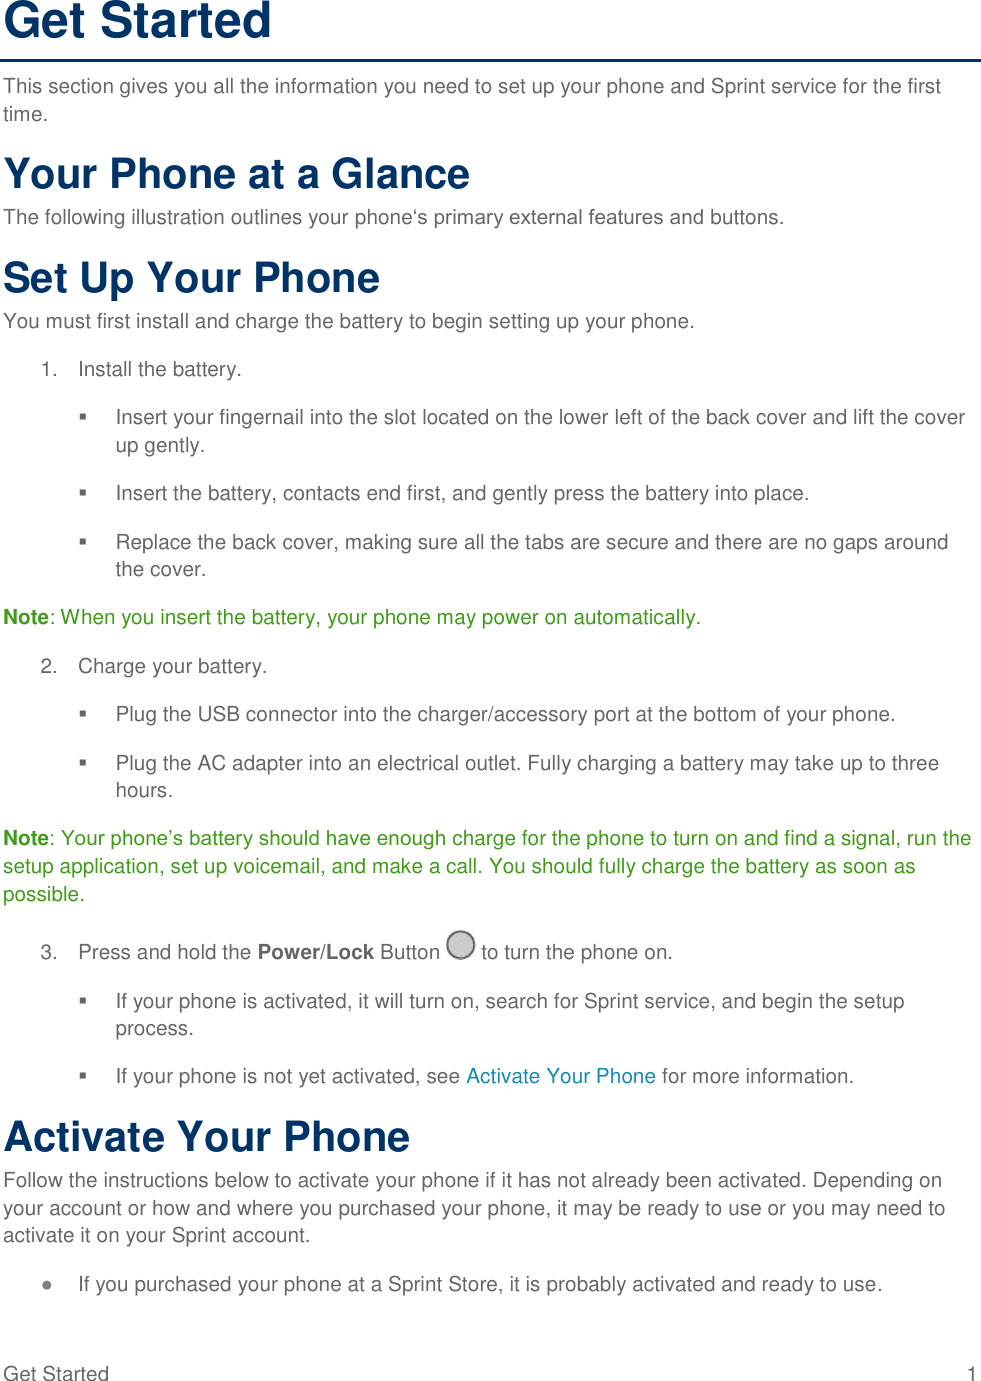 Get Started  1 Get Started This section gives you all the information you need to set up your phone and Sprint service for the first time. Your Phone at a Glance The following illustration outlines your phone‗s primary external features and buttons. Set Up Your Phone You must first install and charge the battery to begin setting up your phone. 1.  Install the battery.   Insert your fingernail into the slot located on the lower left of the back cover and lift the cover up gently.   Insert the battery, contacts end first, and gently press the battery into place.   Replace the back cover, making sure all the tabs are secure and there are no gaps around the cover. Note: When you insert the battery, your phone may power on automatically. 2.  Charge your battery.   Plug the USB connector into the charger/accessory port at the bottom of your phone.   Plug the AC adapter into an electrical outlet. Fully charging a battery may take up to three hours. Note: Your phone‘s battery should have enough charge for the phone to turn on and find a signal, run the setup application, set up voicemail, and make a call. You should fully charge the battery as soon as possible.  3.  Press and hold the Power/Lock Button   to turn the phone on.    If your phone is activated, it will turn on, search for Sprint service, and begin the setup process.    If your phone is not yet activated, see Activate Your Phone for more information.  Activate Your Phone Follow the instructions below to activate your phone if it has not already been activated. Depending on your account or how and where you purchased your phone, it may be ready to use or you may need to activate it on your Sprint account. ● If you purchased your phone at a Sprint Store, it is probably activated and ready to use. 